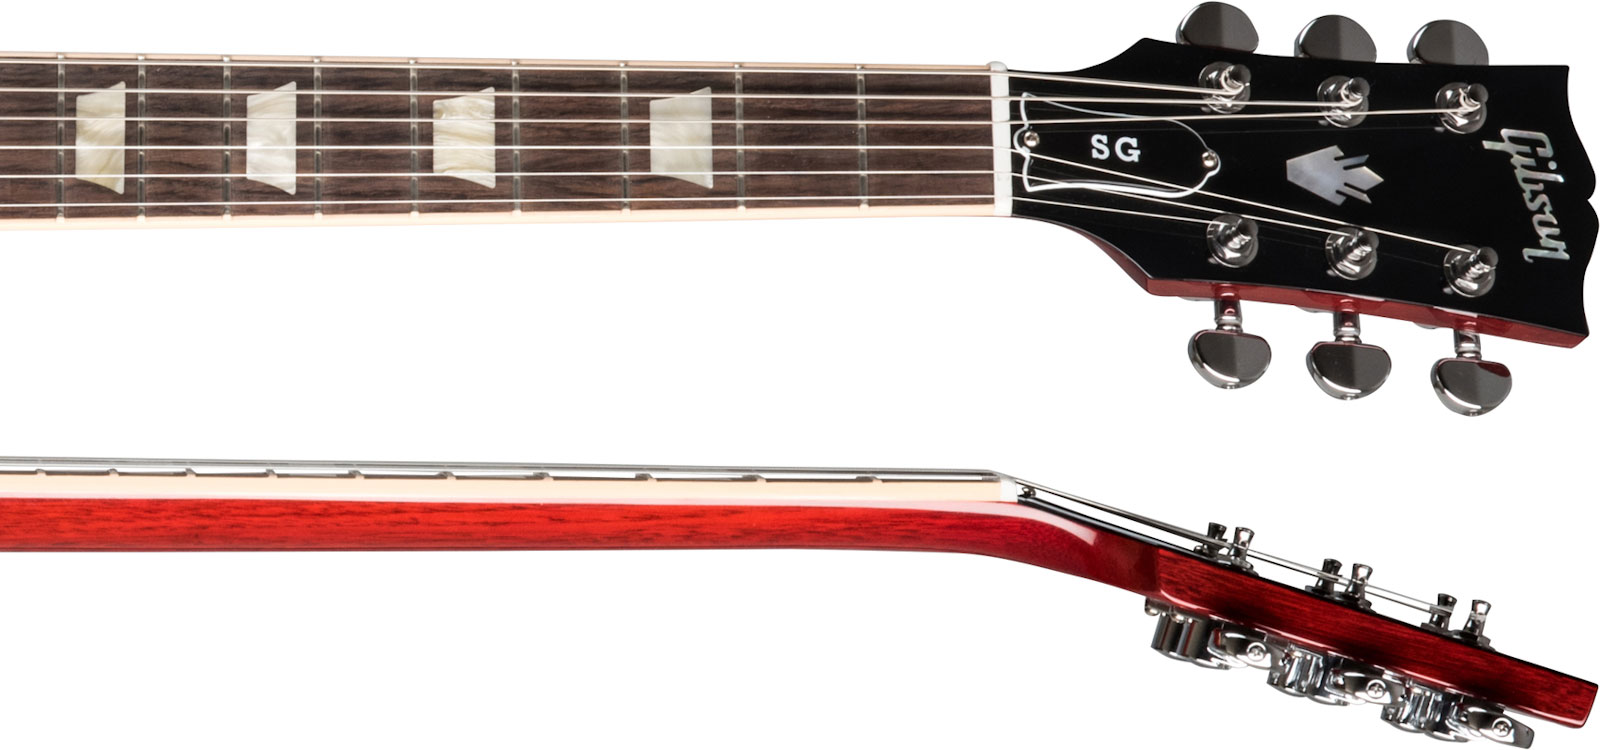 Gibson Sg Standard 2h Ht Rw - Heritage Cherry - Double cut electric guitar - Variation 3